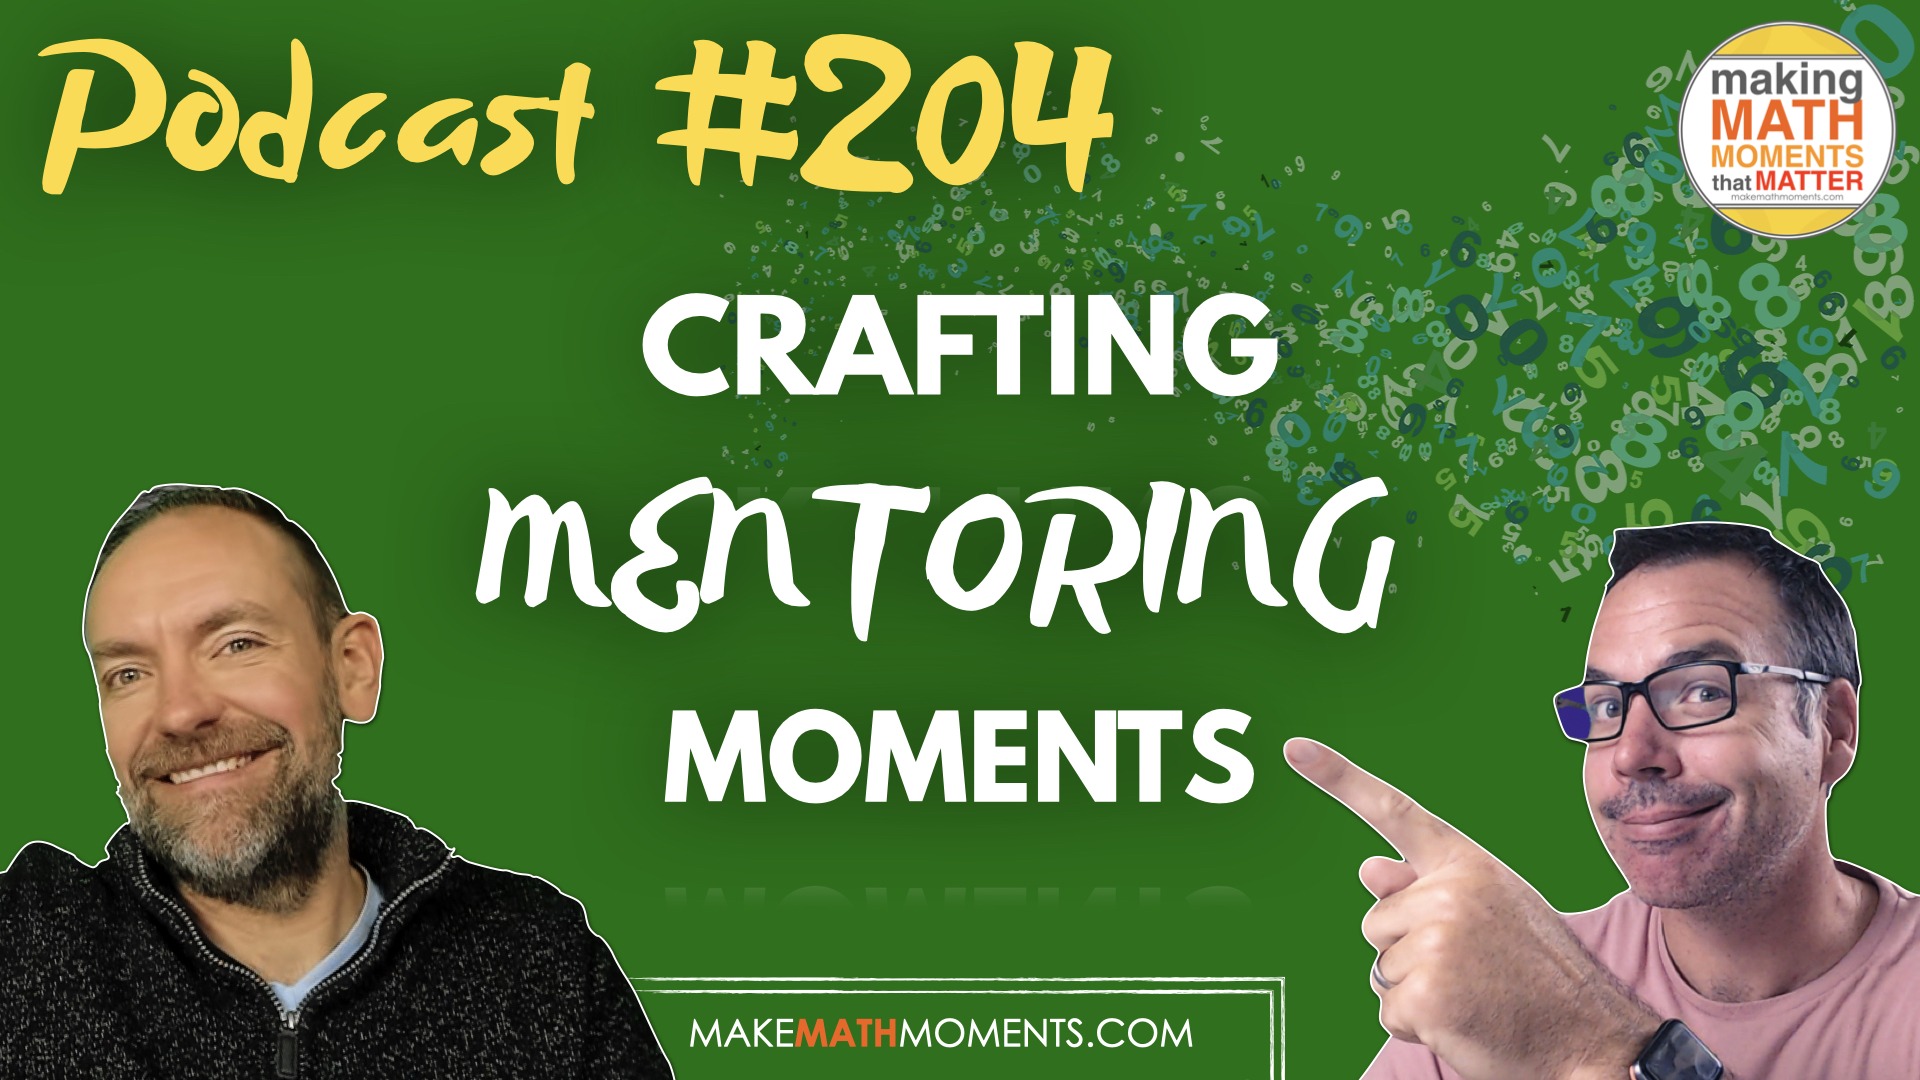 Episode 204: Crafting Mentoring Moments – An Interview With Jim Strachan